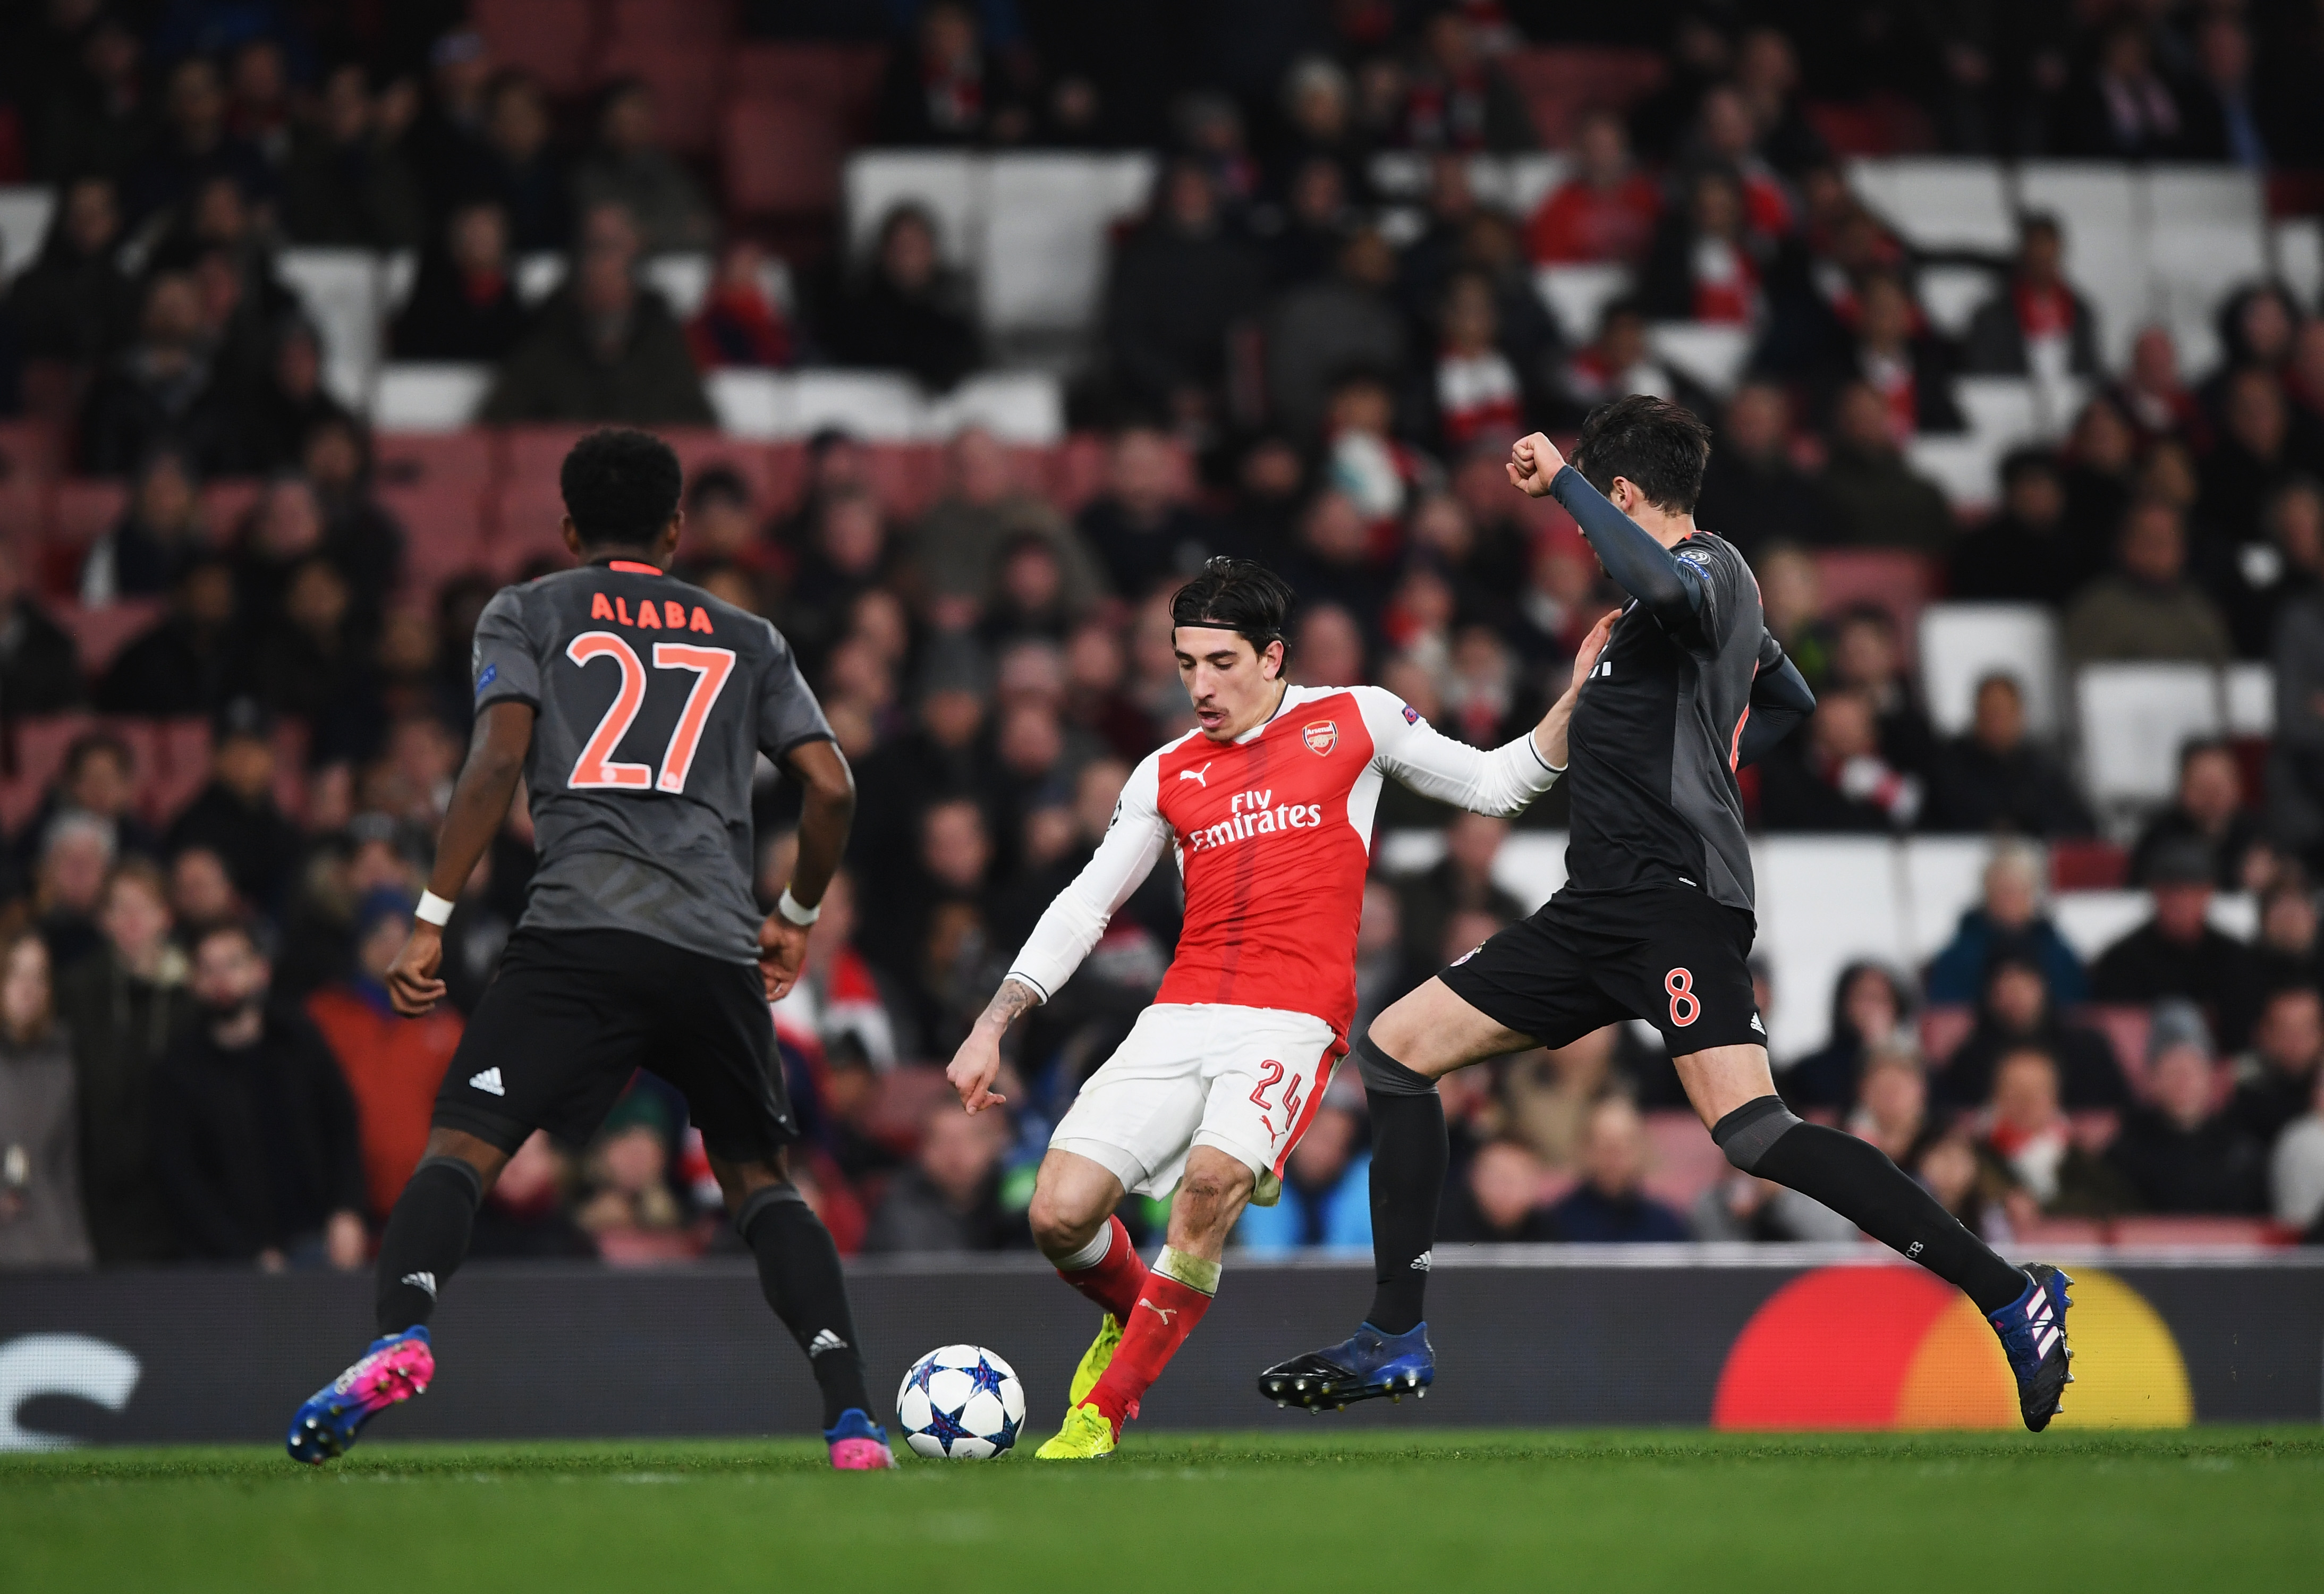 LONDON, ENGLAND - MARCH 07:  Hector Bellerin of Arsenal takes on David Alaba and Javi Martinez of Bayern Muenchen with a back drop sparsely populated seats during the UEFA Champions League Round of 16 second leg match between Arsenal FC and FC Bayern Muenchen at Emirates Stadium on March 7, 2017 in London, United Kingdom.  (Photo by Shaun Botterill/Getty Images)